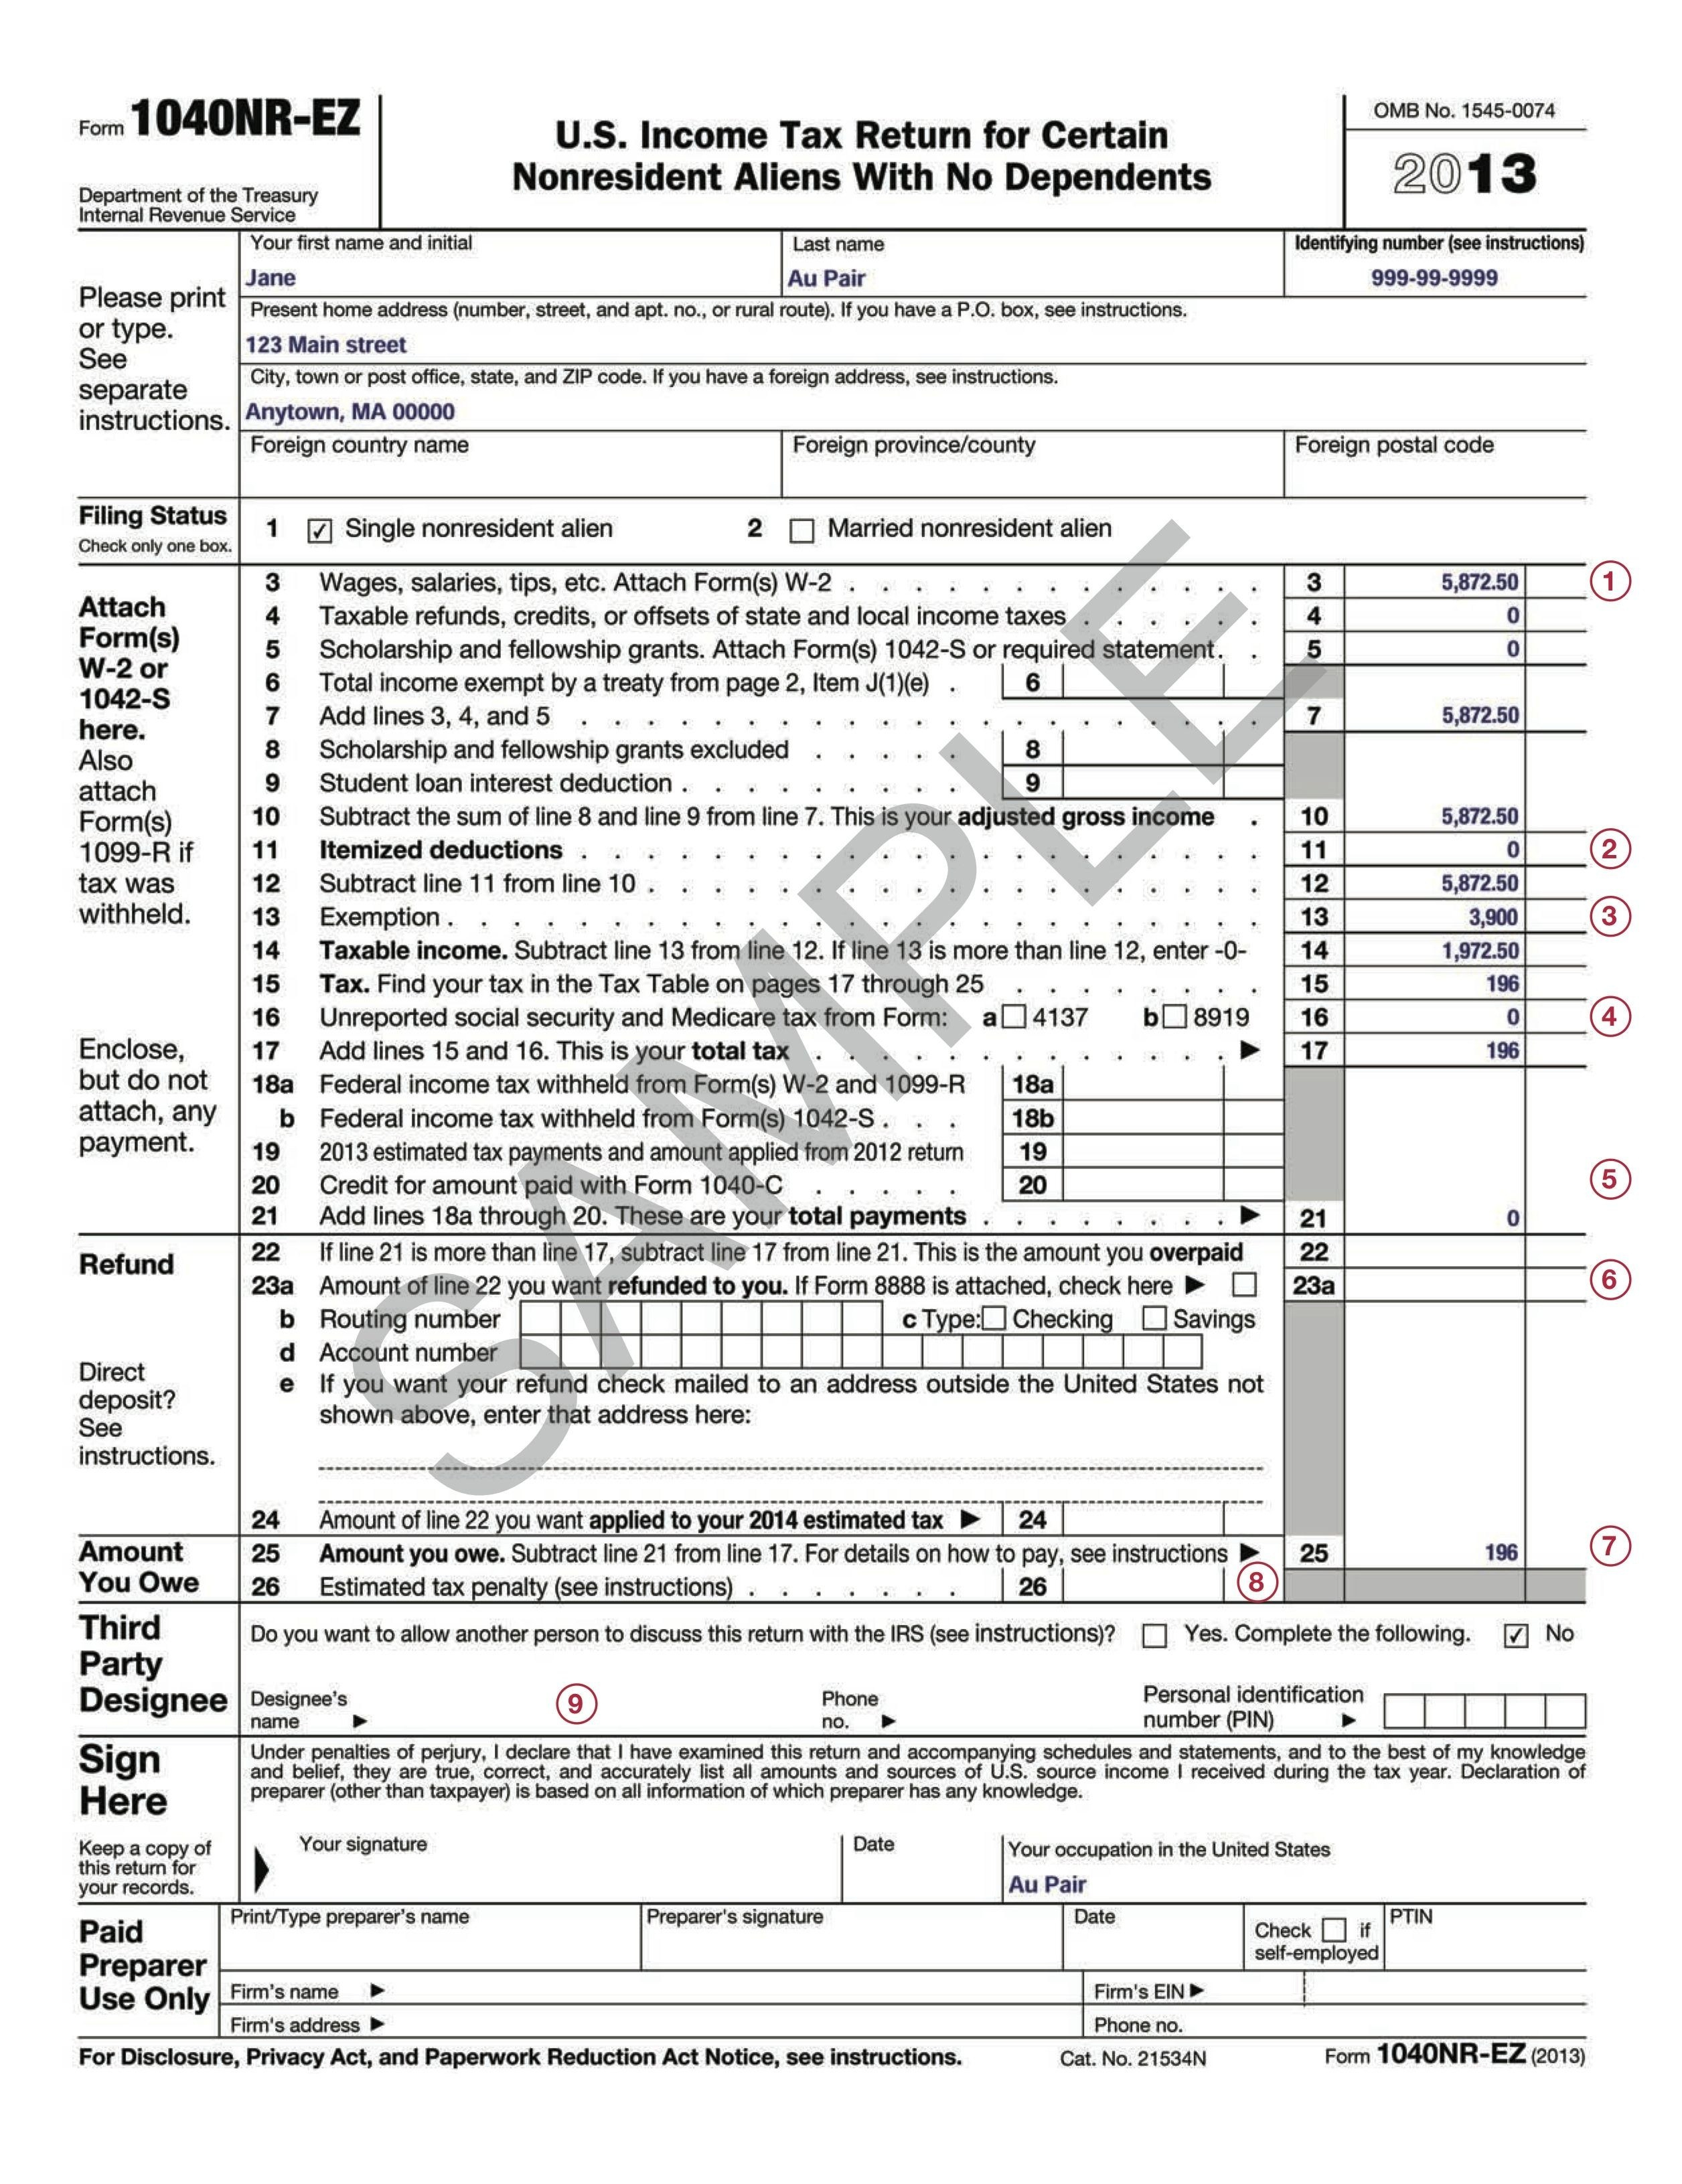 1099 Misc Fillable Form 2017 Lovely Printable 1099 Tax Form New 2017 - Free Printable 1099 Misc Form 2013